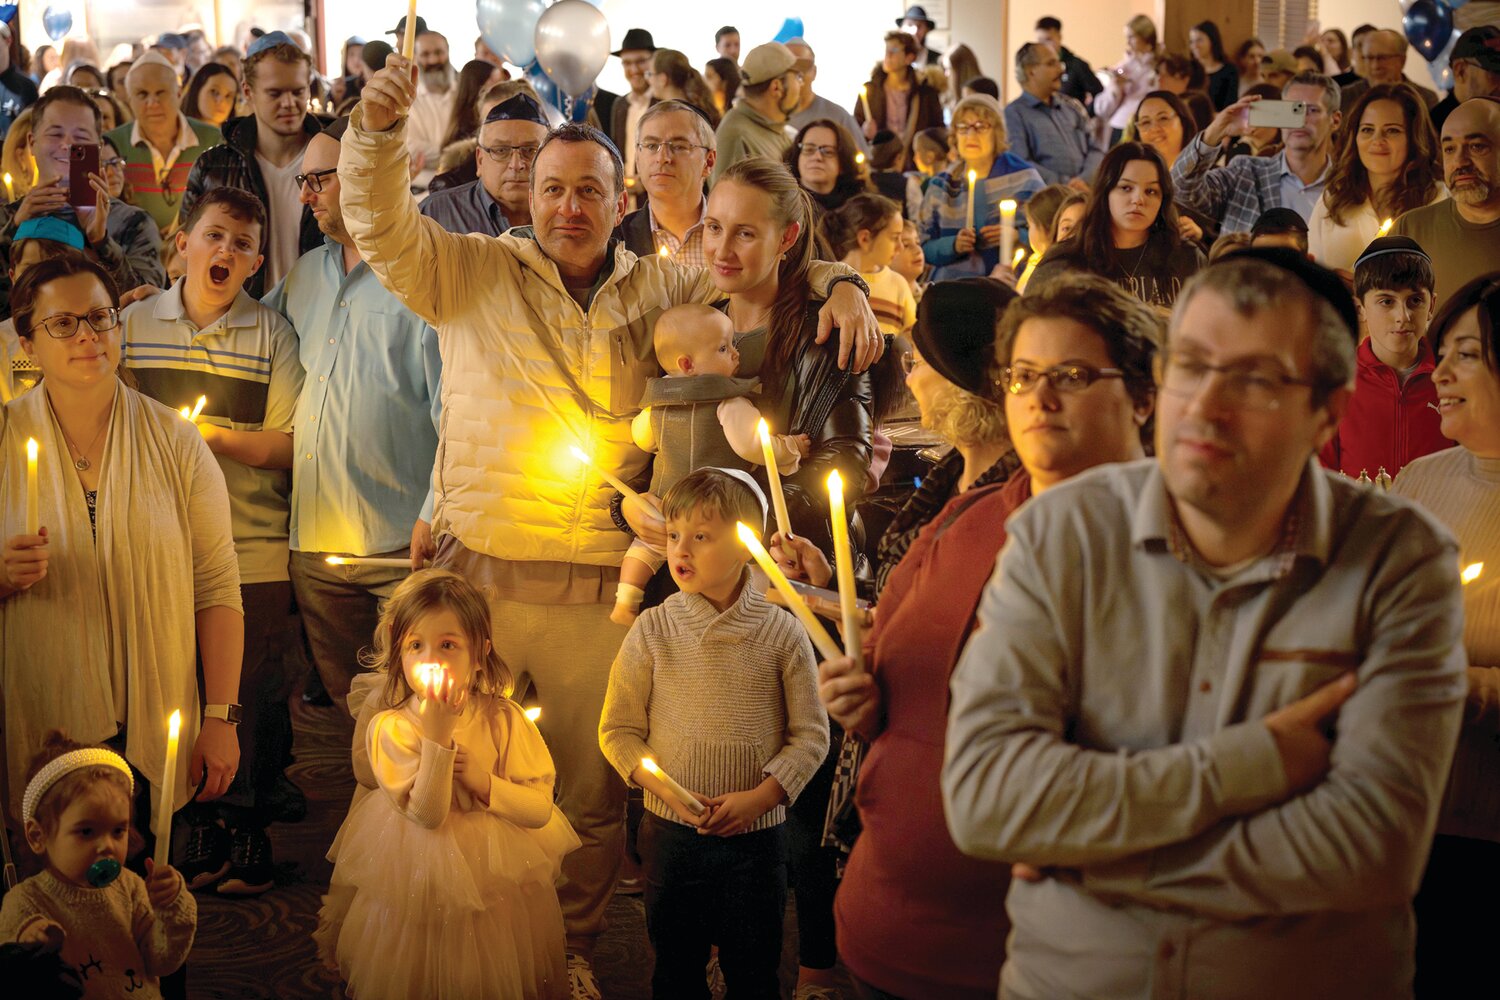 The crowd holds candles during Sunday’s Family Chanukah Celebration at the Glazier Jewish Center in Newtown.